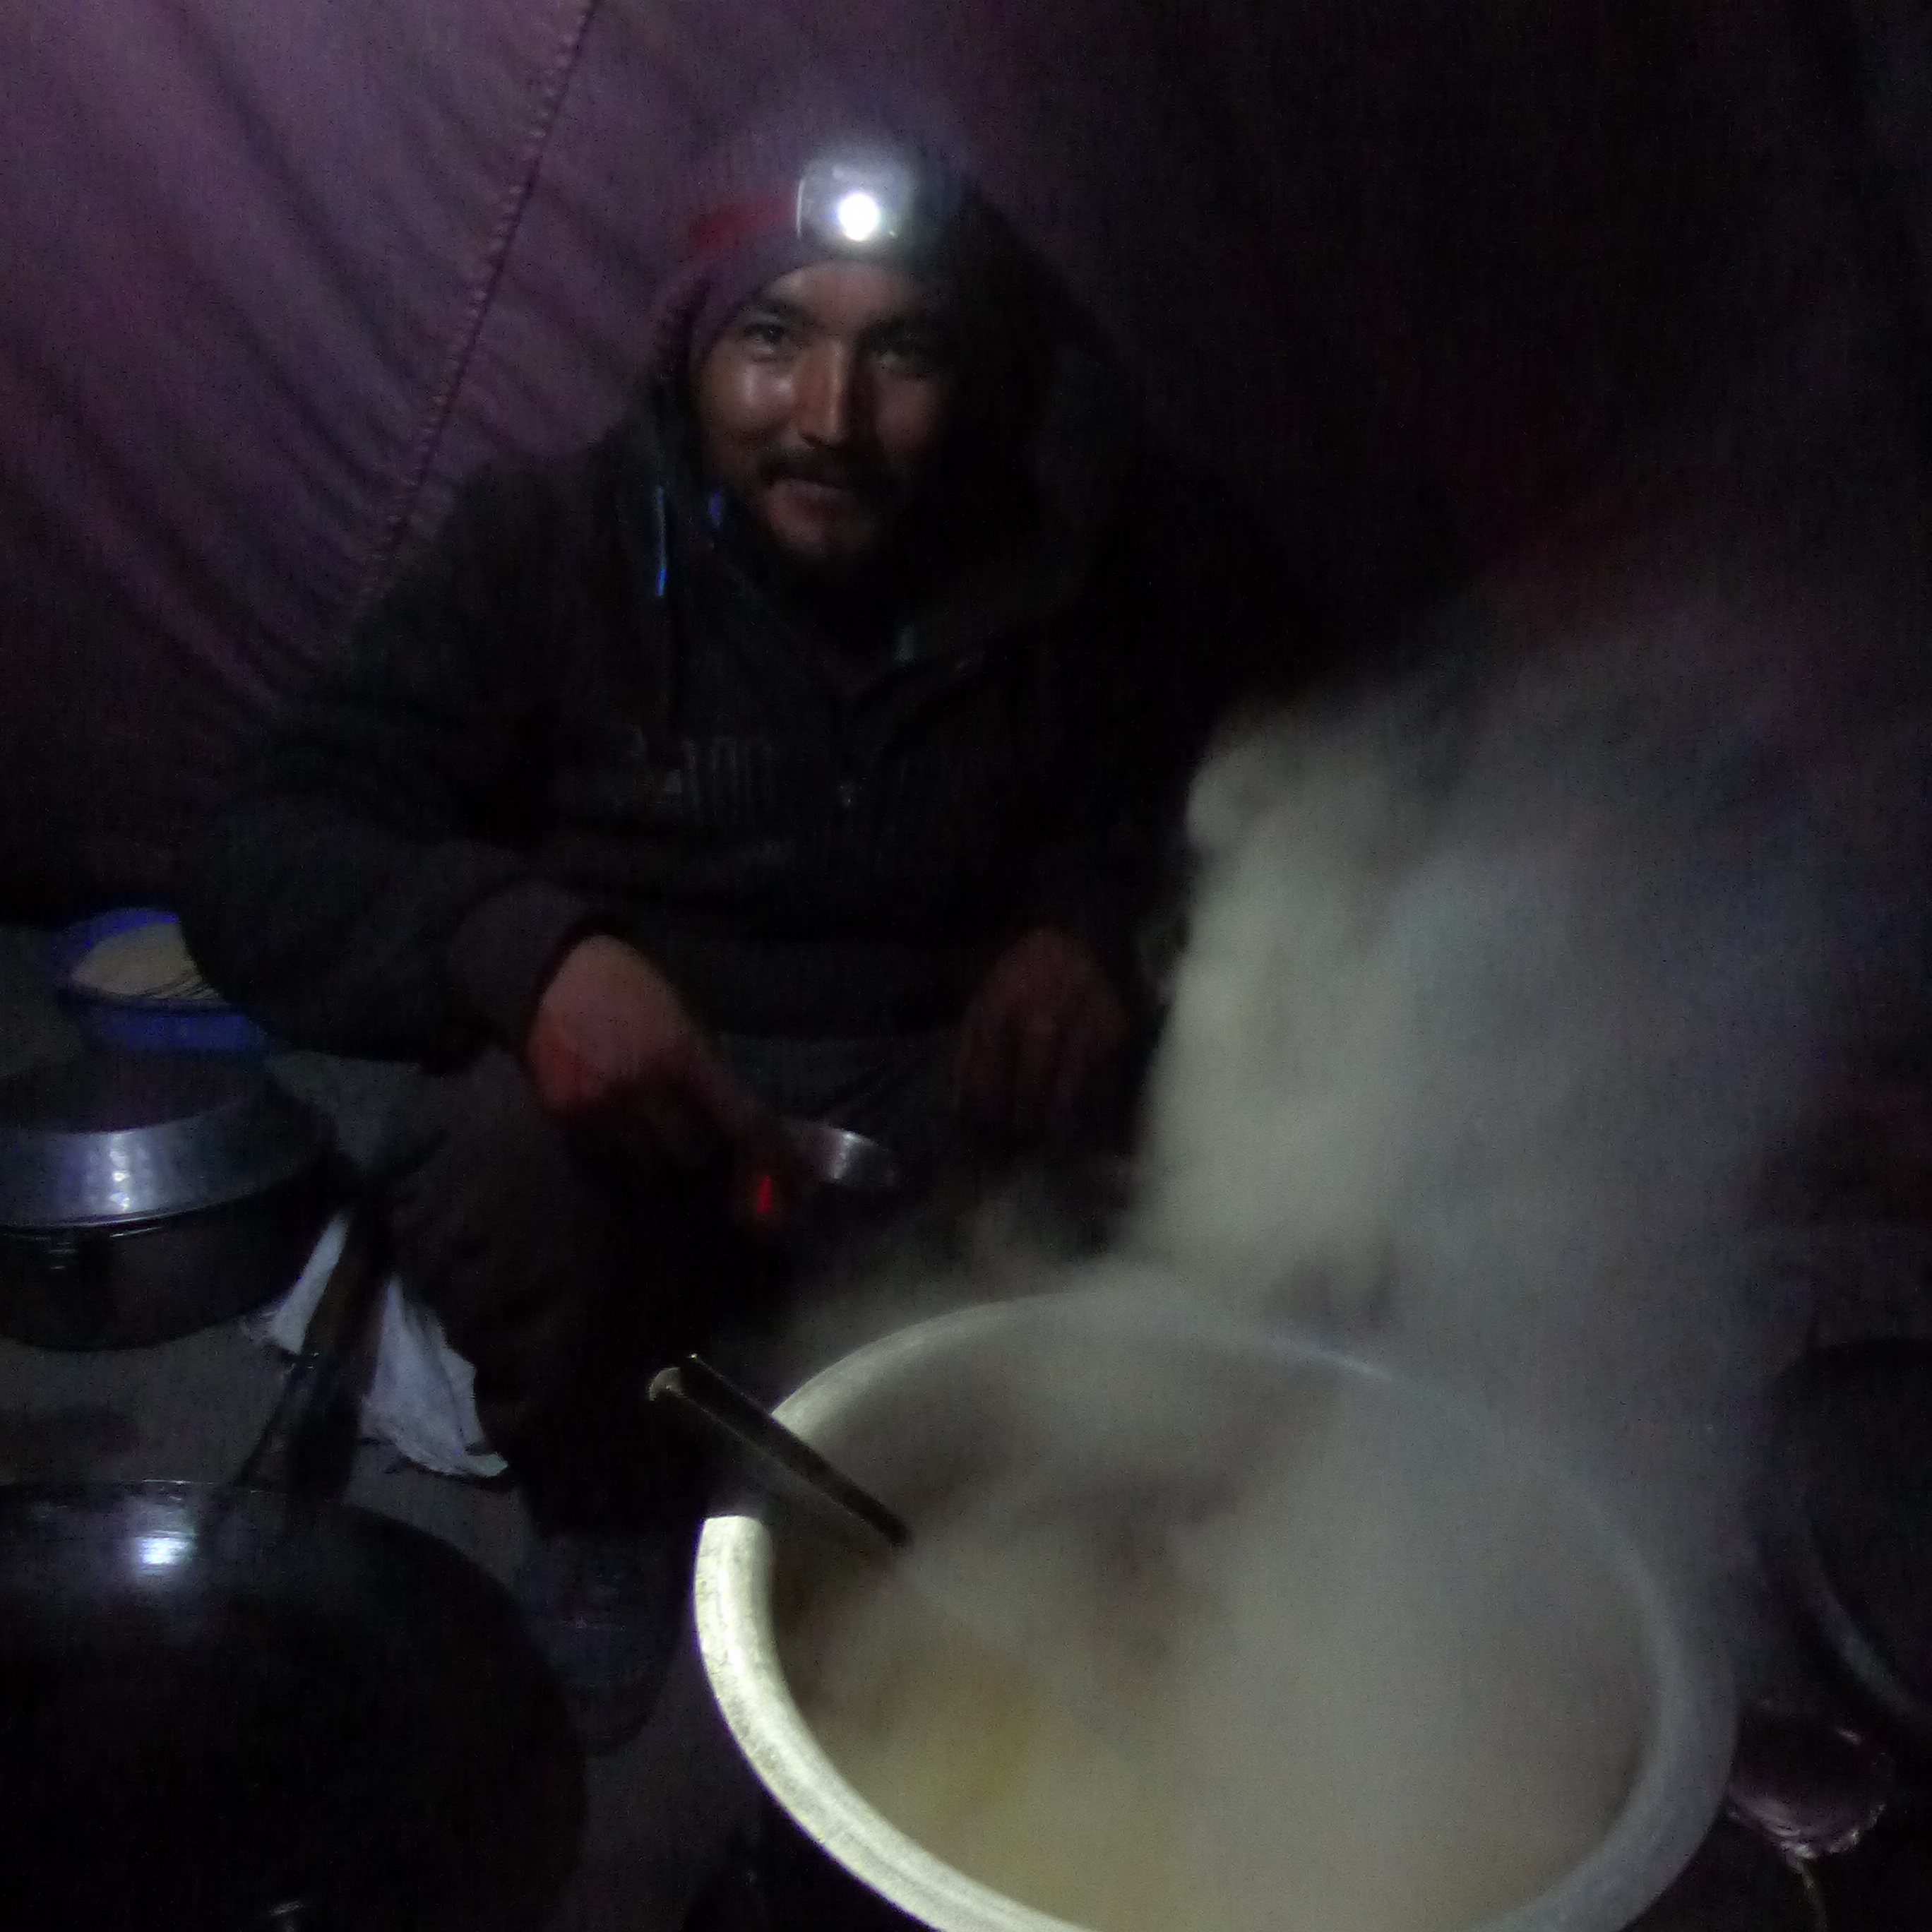 Our head chef Lobzang cooking with a headlamp